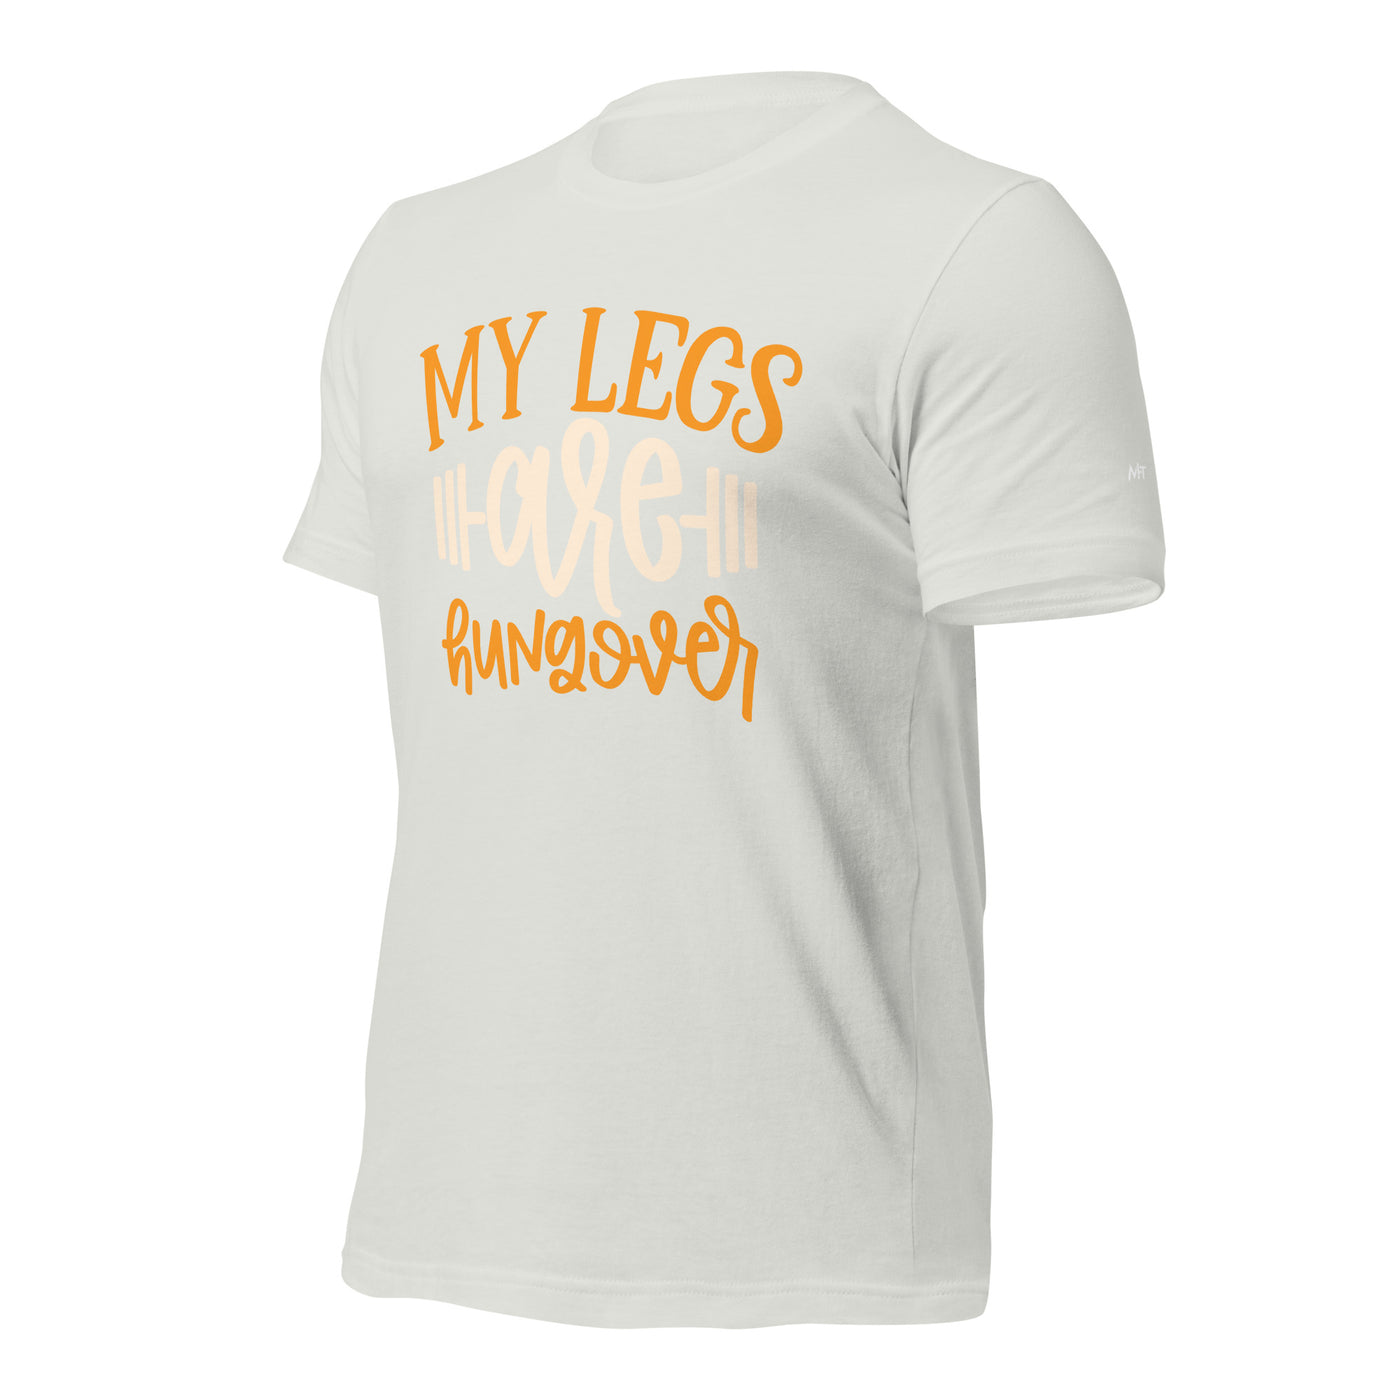 My Legs are Hungover - Unisex t-shirt